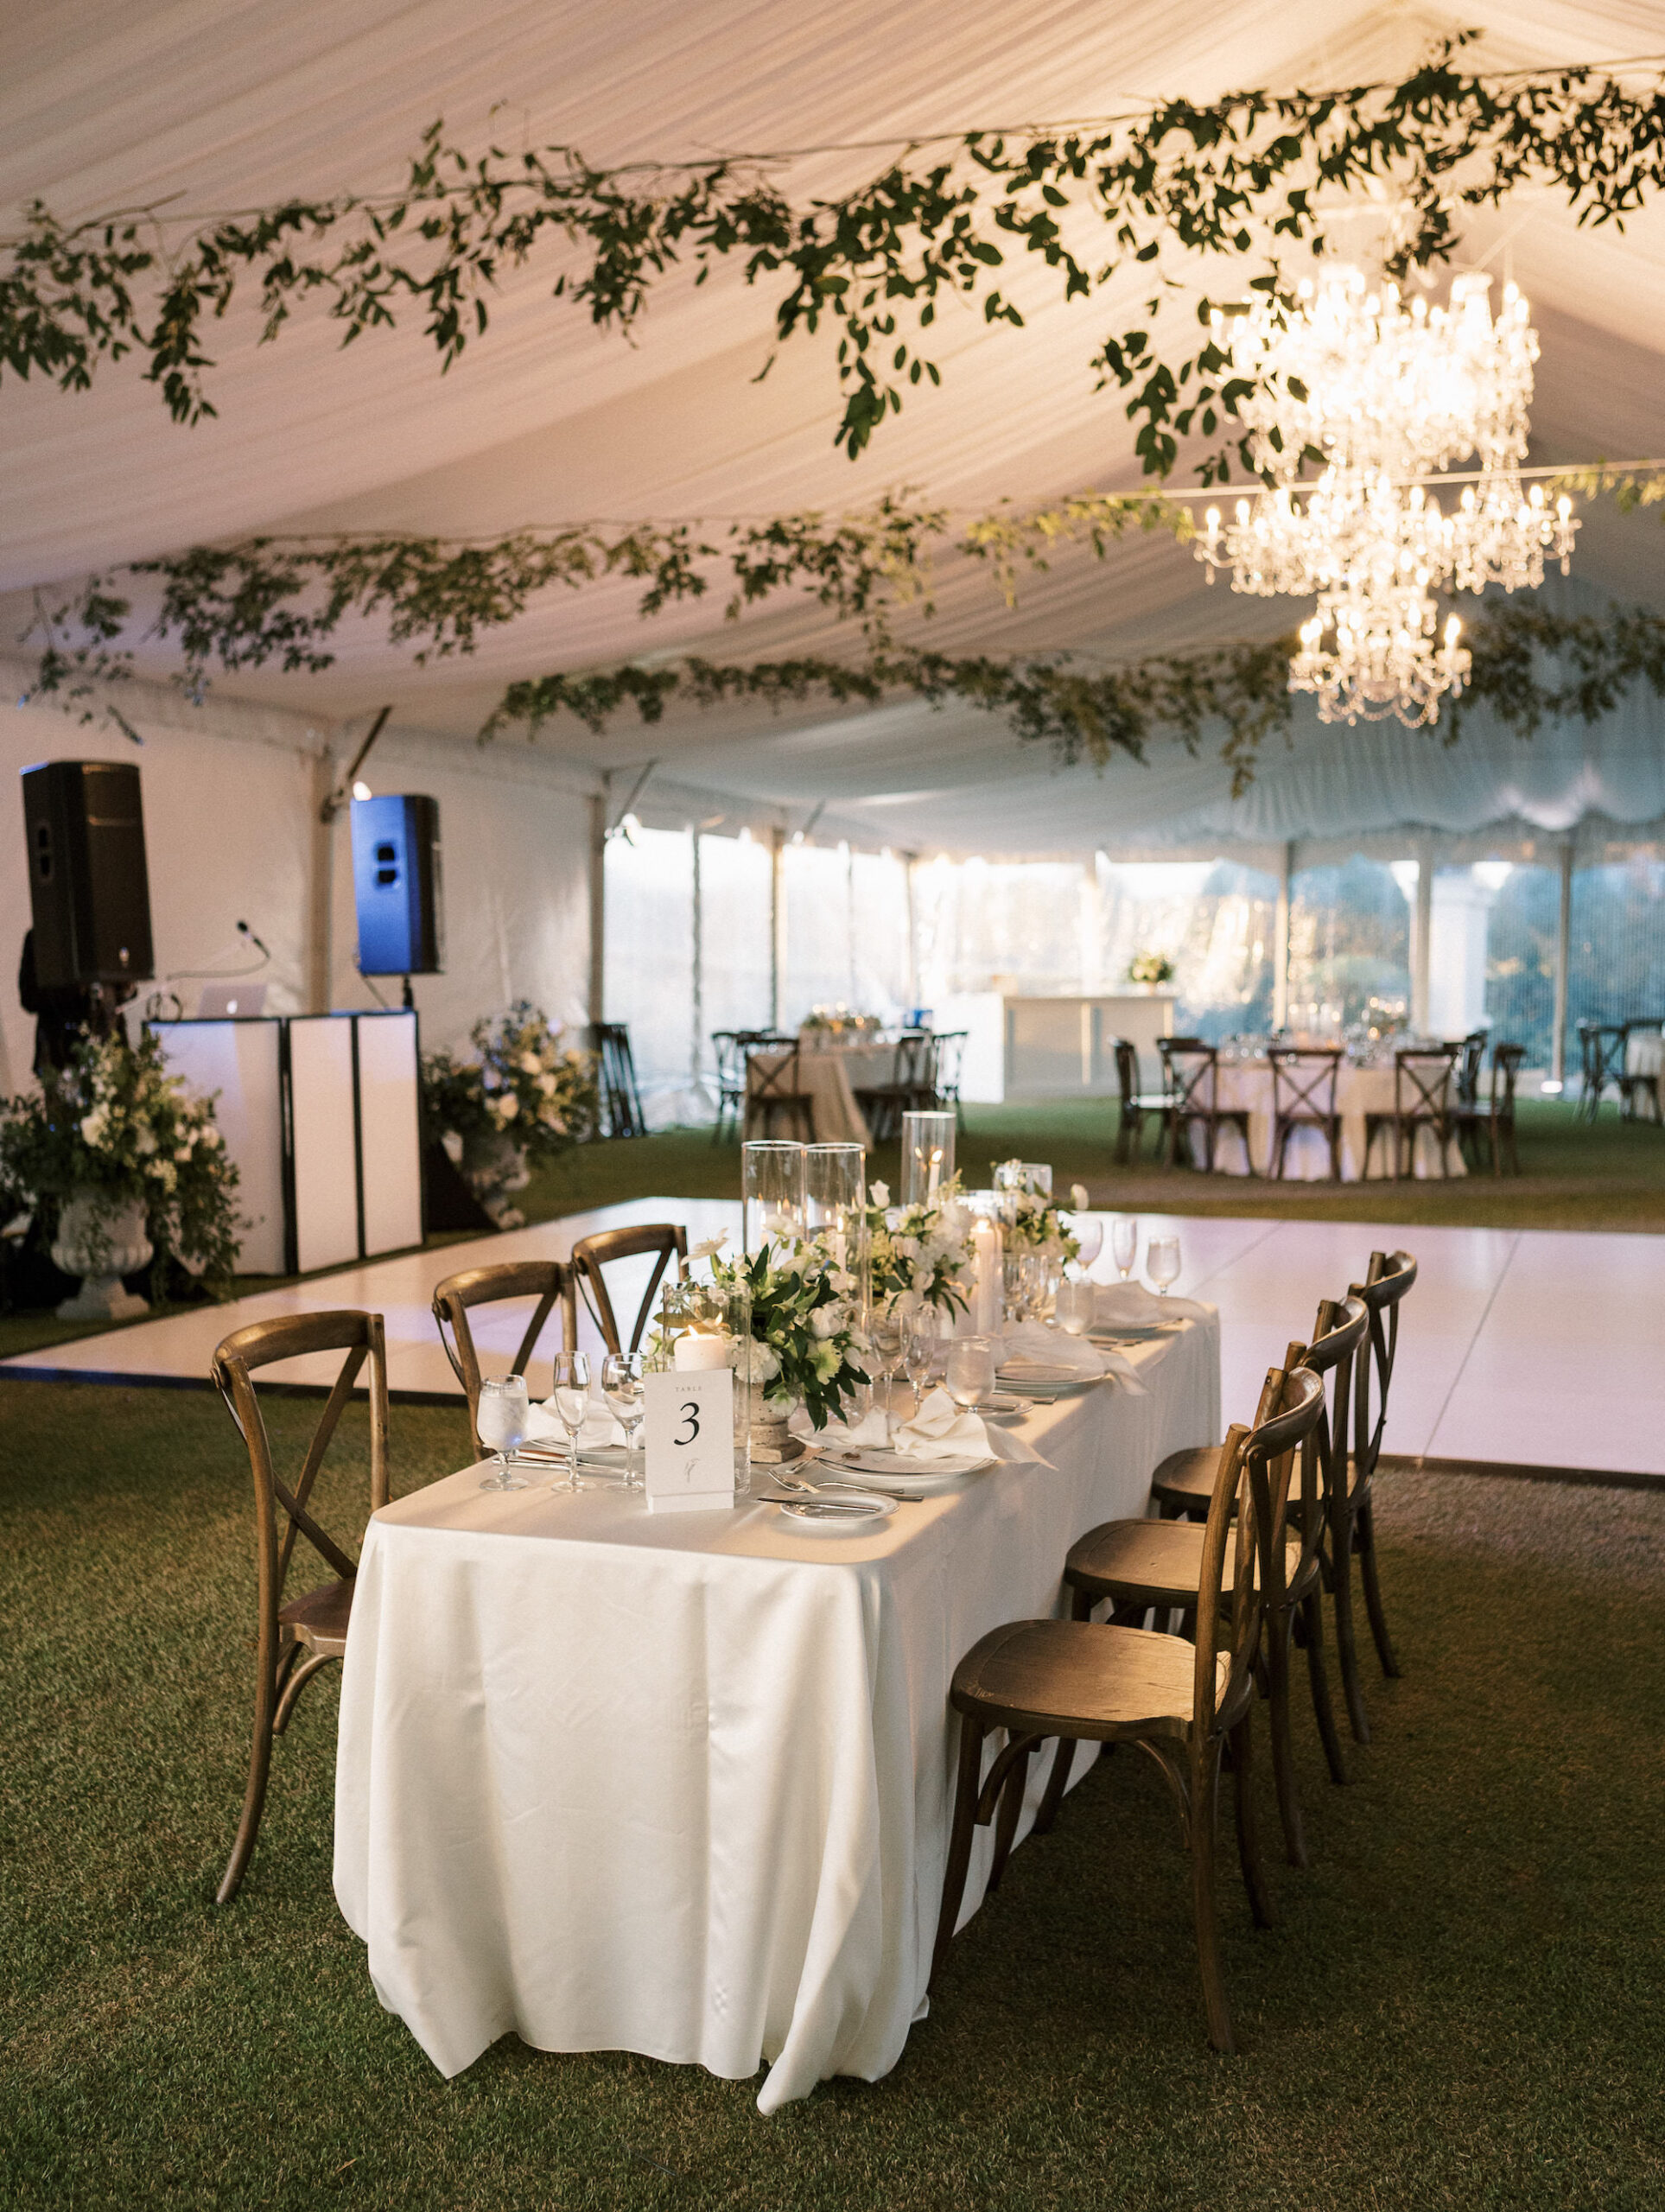 Old Florida Elegant White Tent Wedding Reception Decor, Hanging Greenery Garlands, Crystal Chandeliers, Long Tables with Wooden Cross Back Chairs, Candles, Low White Roses and Greenery Floral Centerpieces